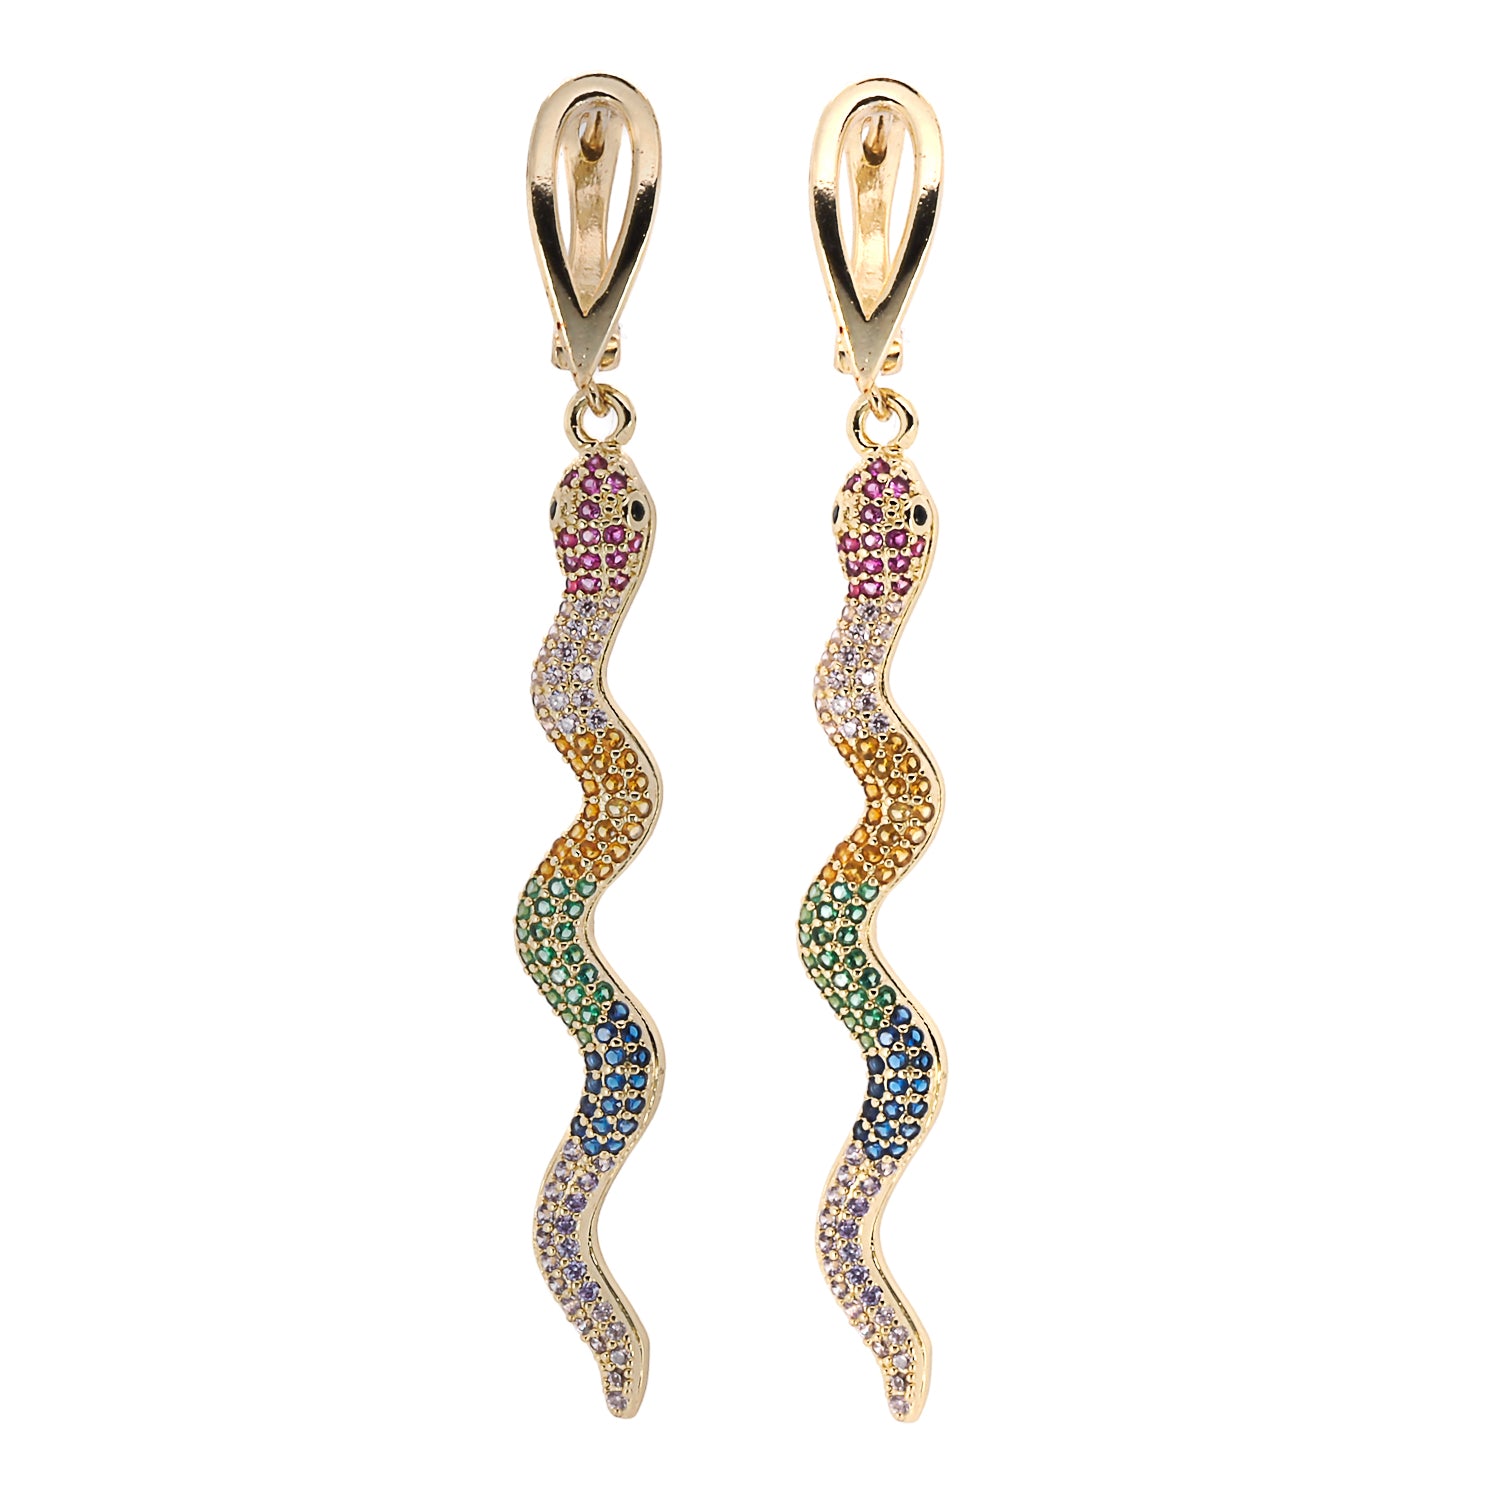 Cheerful Snake Earrings featuring a gold-plated snake design with multicolor zircon stones.